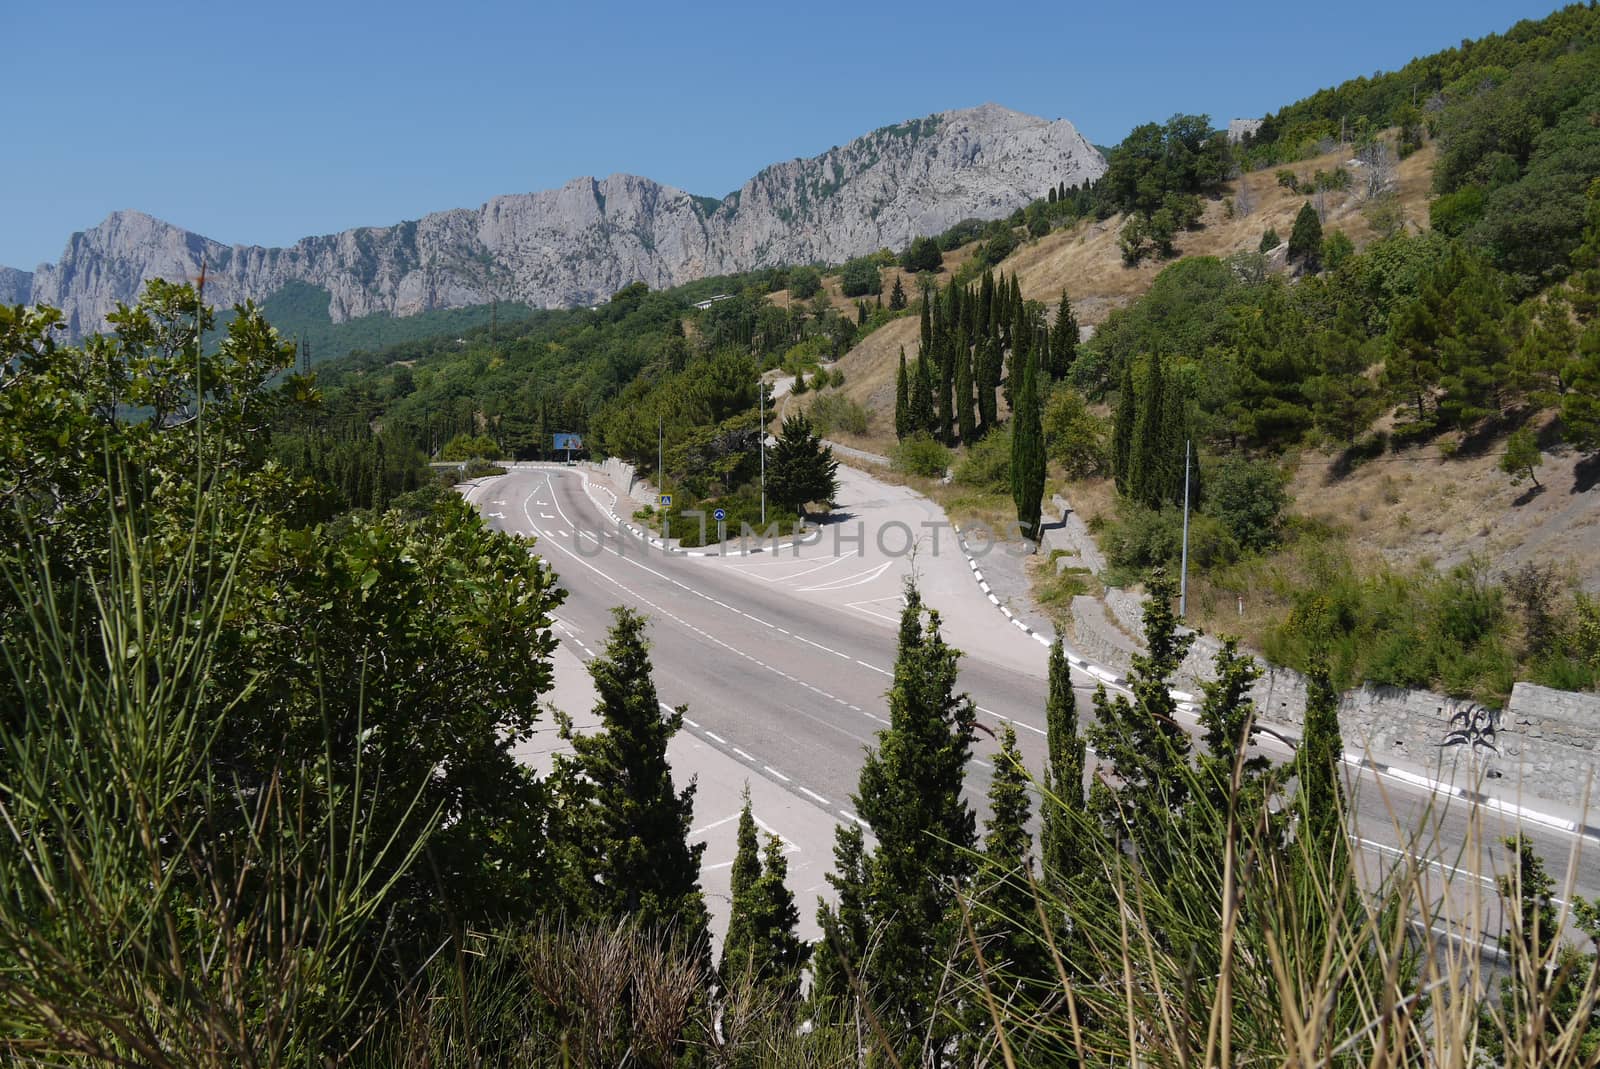 the road is twisted on the background of the steep cliffs surrounded by dense forest